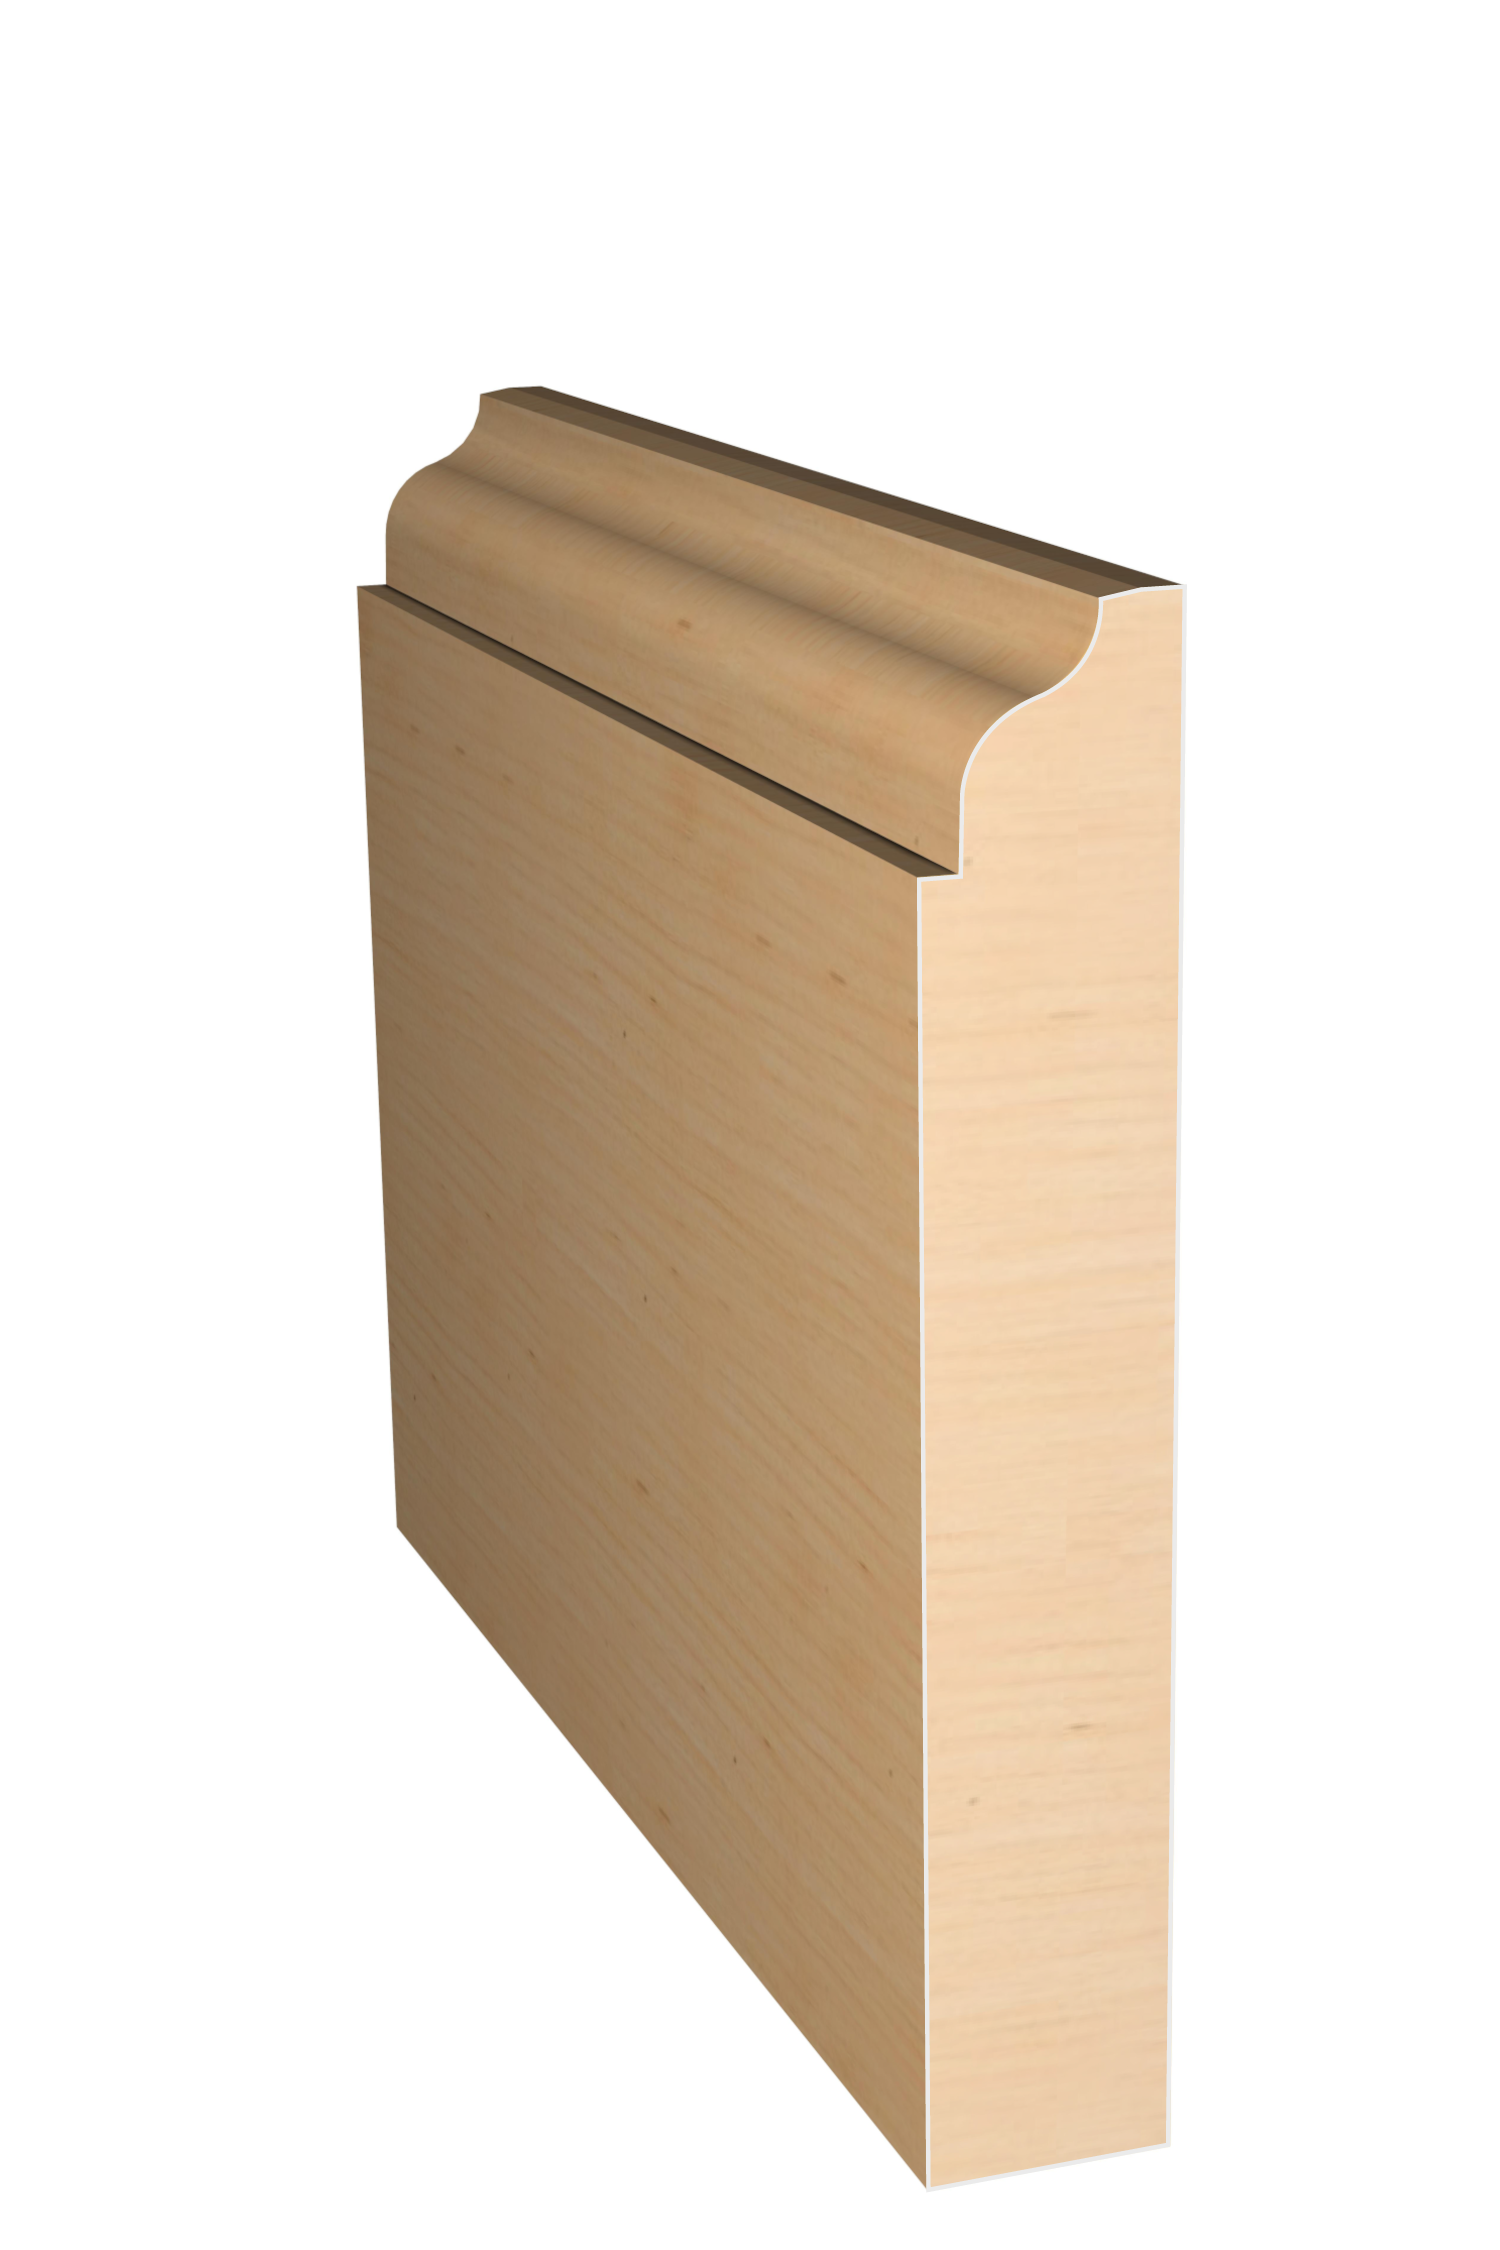 Three dimensional rendering of custom base wood molding BAPL41221 made by Public Lumber Company in Detroit.